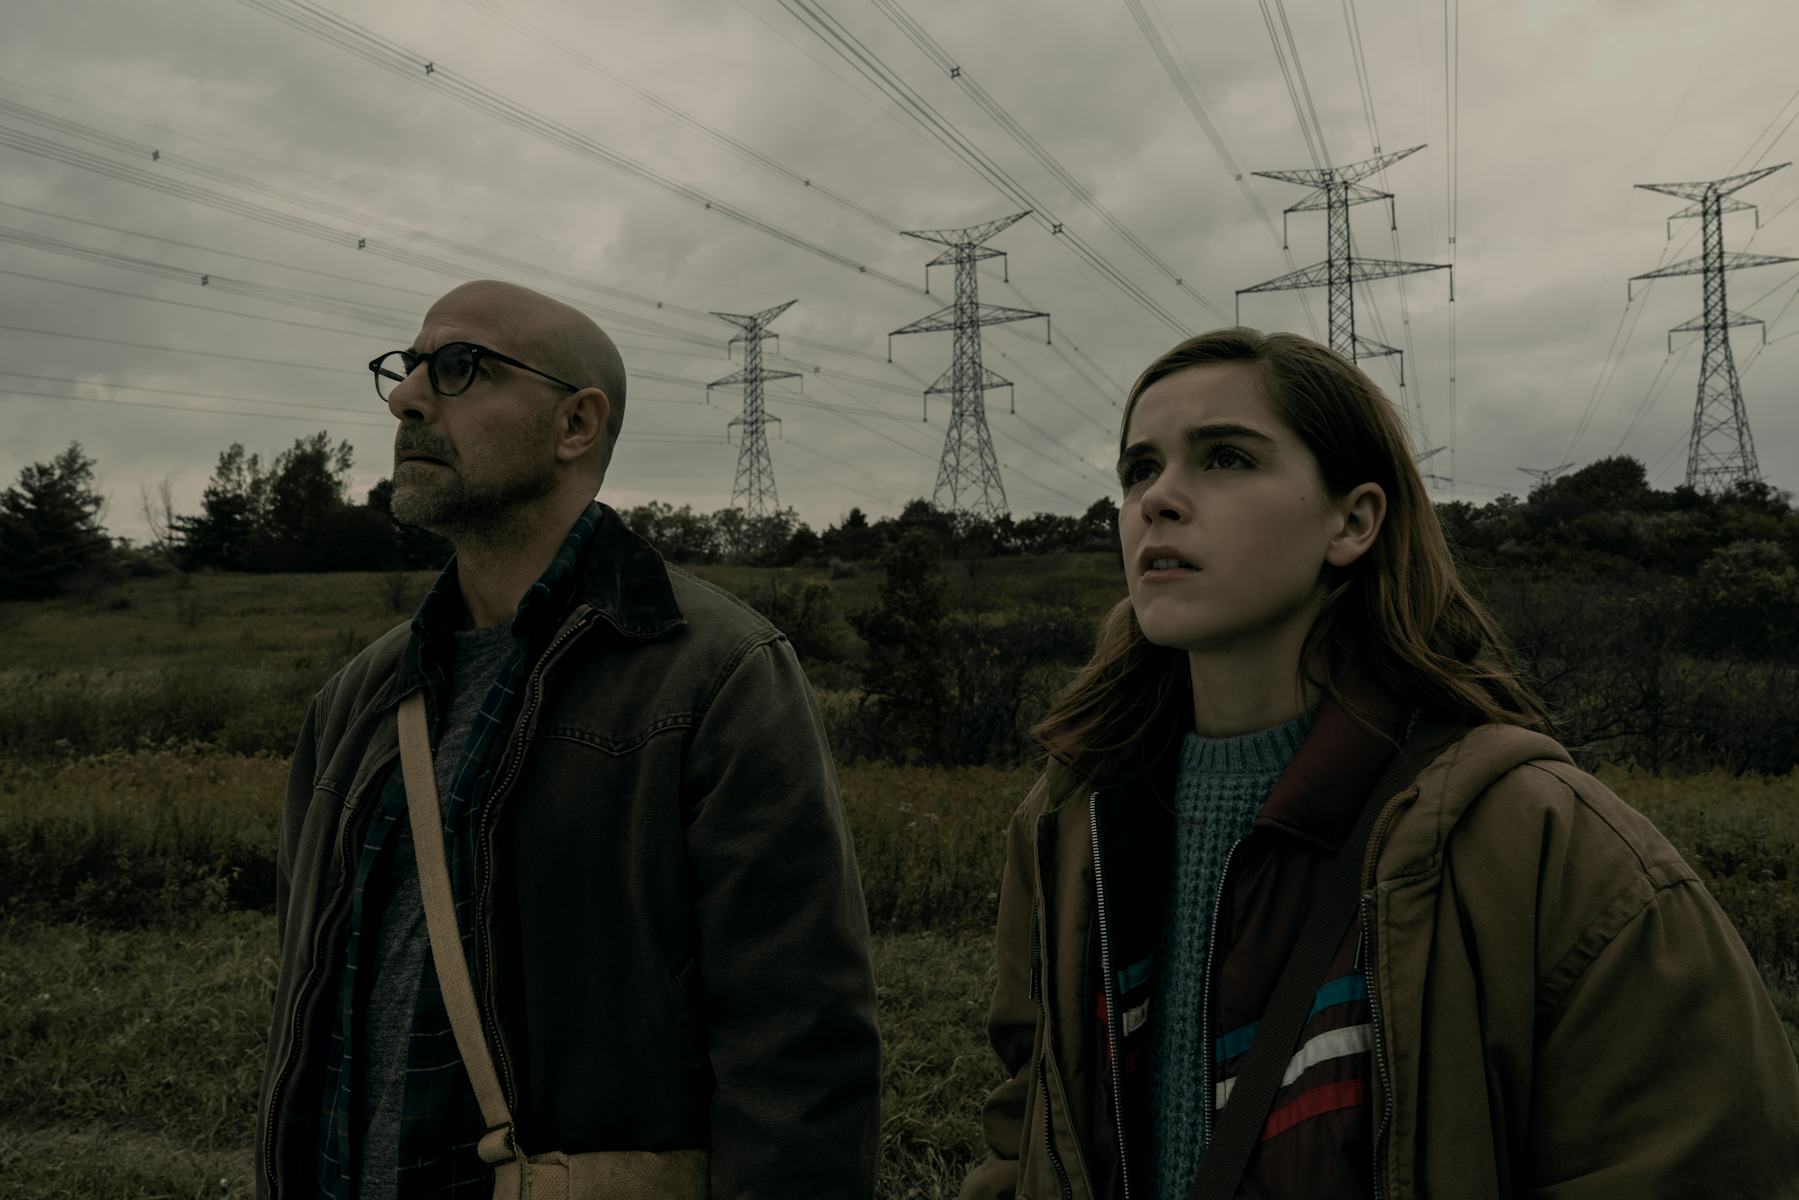 You Need To Watch The Best Post Apocalyptic Cult Thriller On Netflix Asap